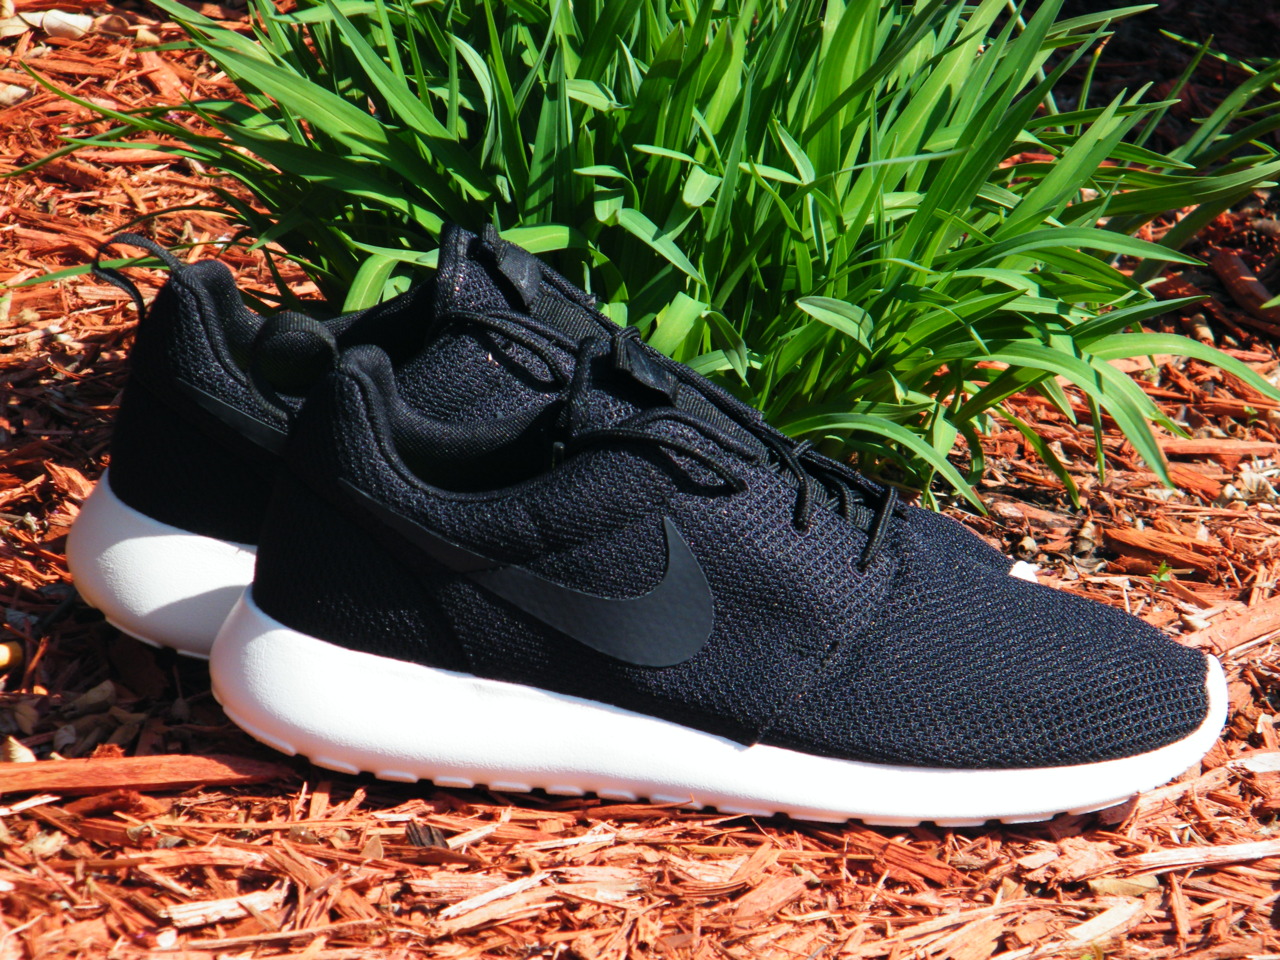 Nike Roshe Run ‘Black/Anthracite-Sail’ – Now Available